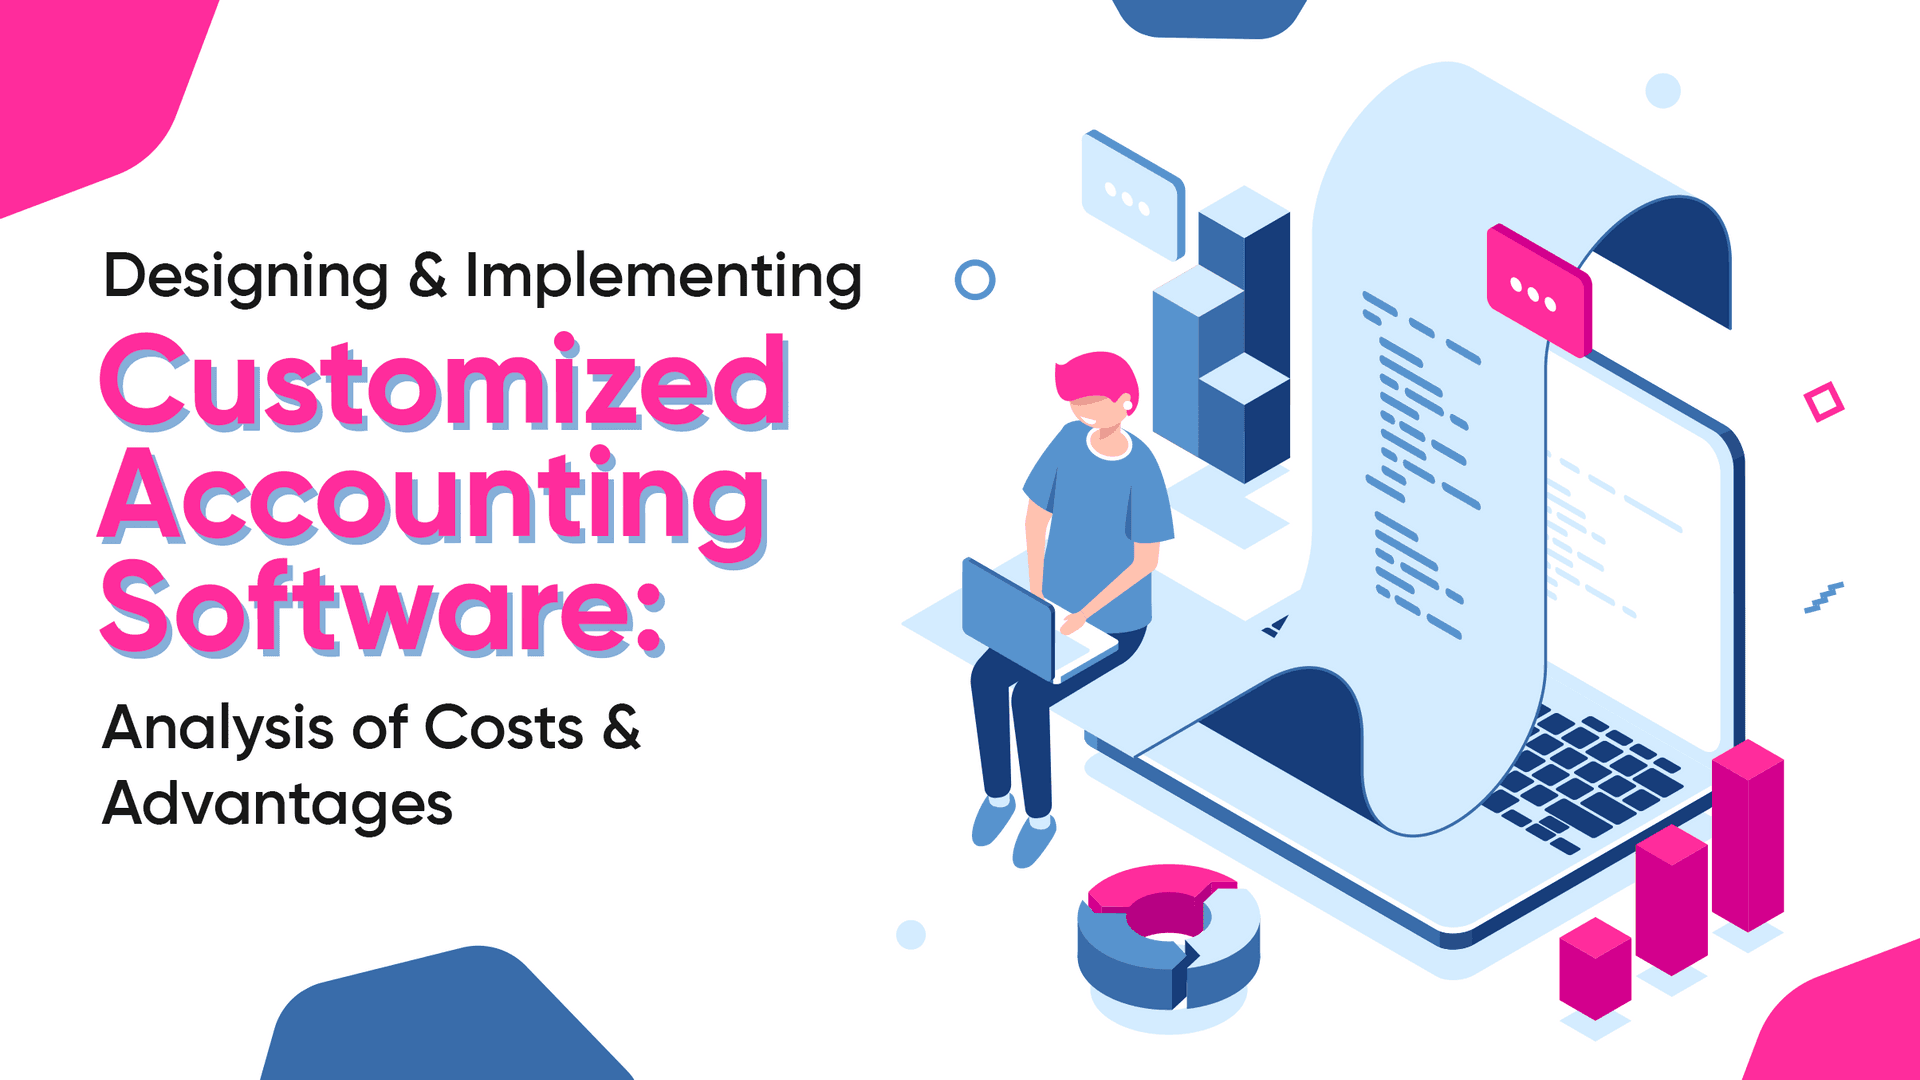 Designing and Implementing Customized Accounting Software: Analysis of Costs and Advantages